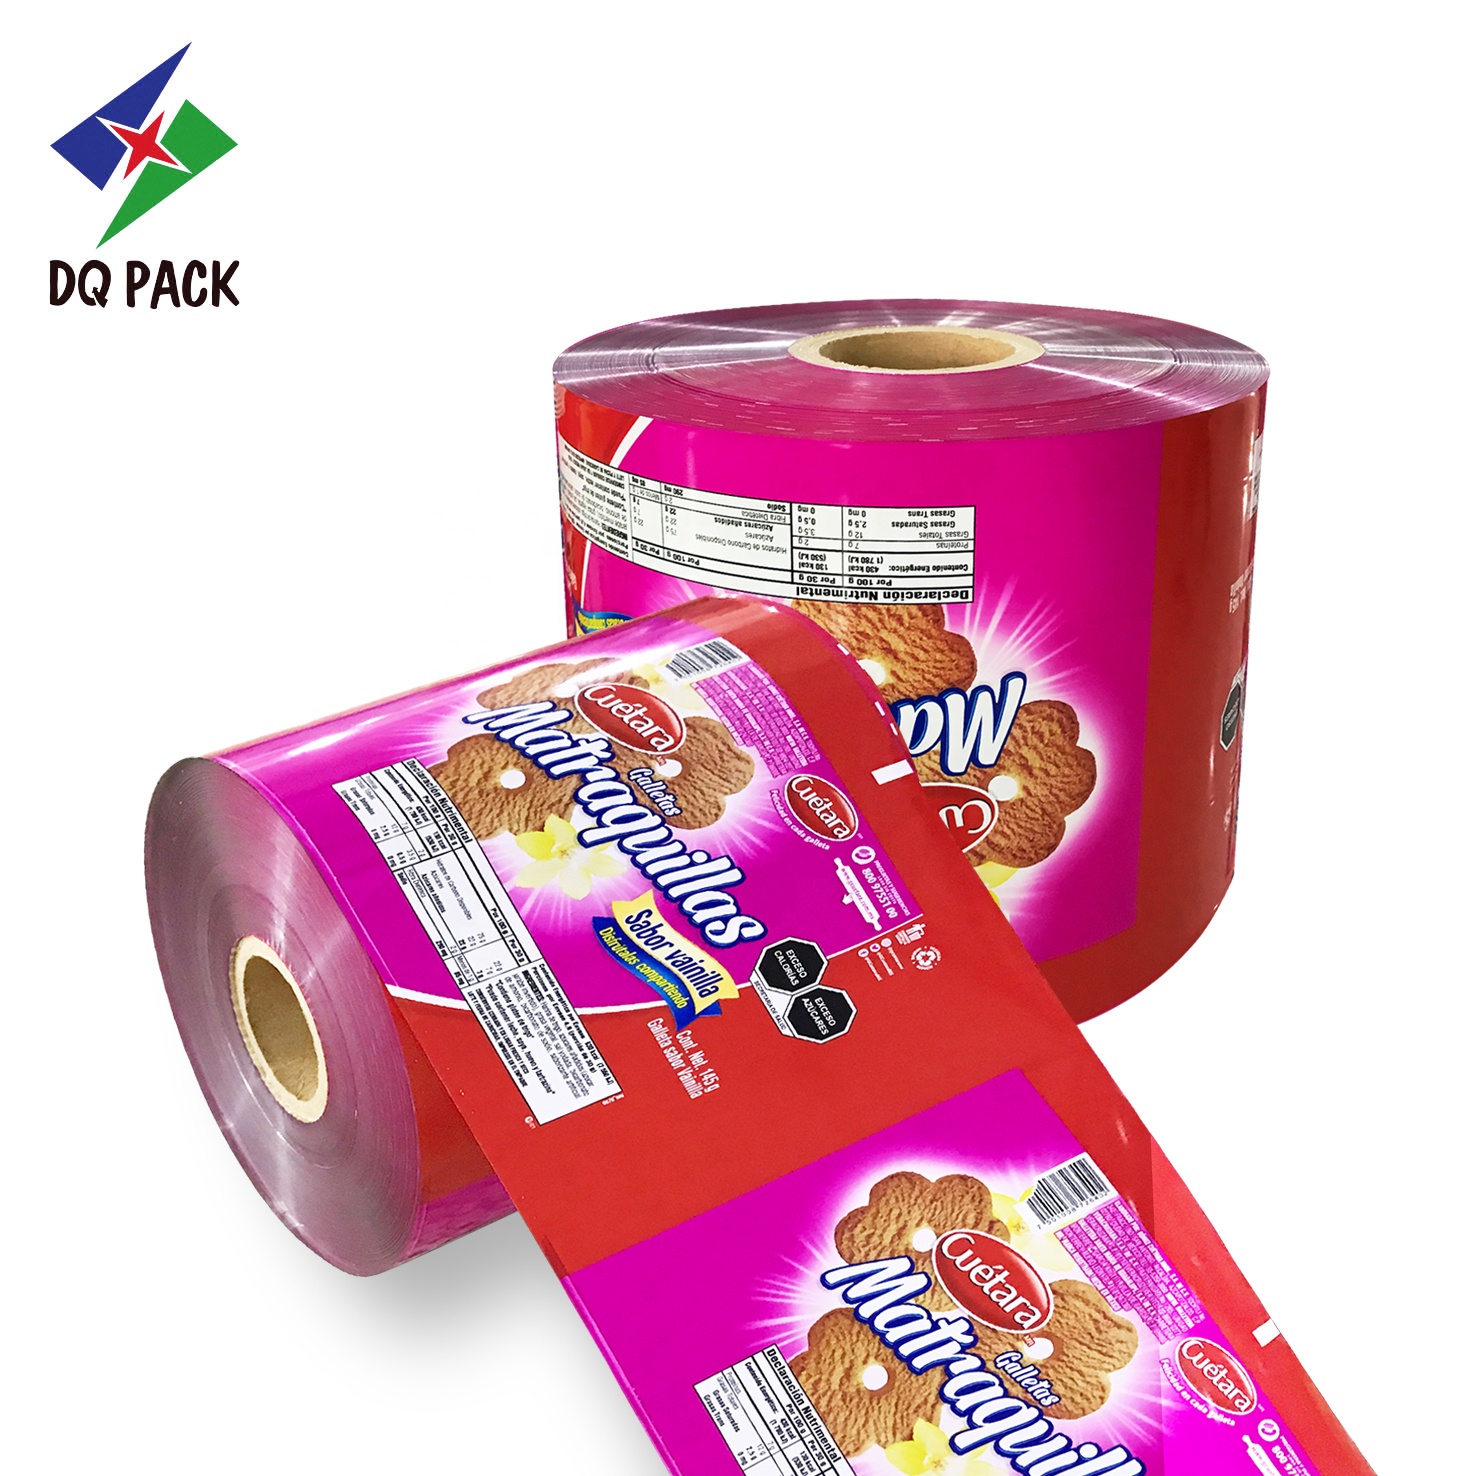 DQ PACK CHINA Flexible Packaging Film biscute roll cookie  roll stock